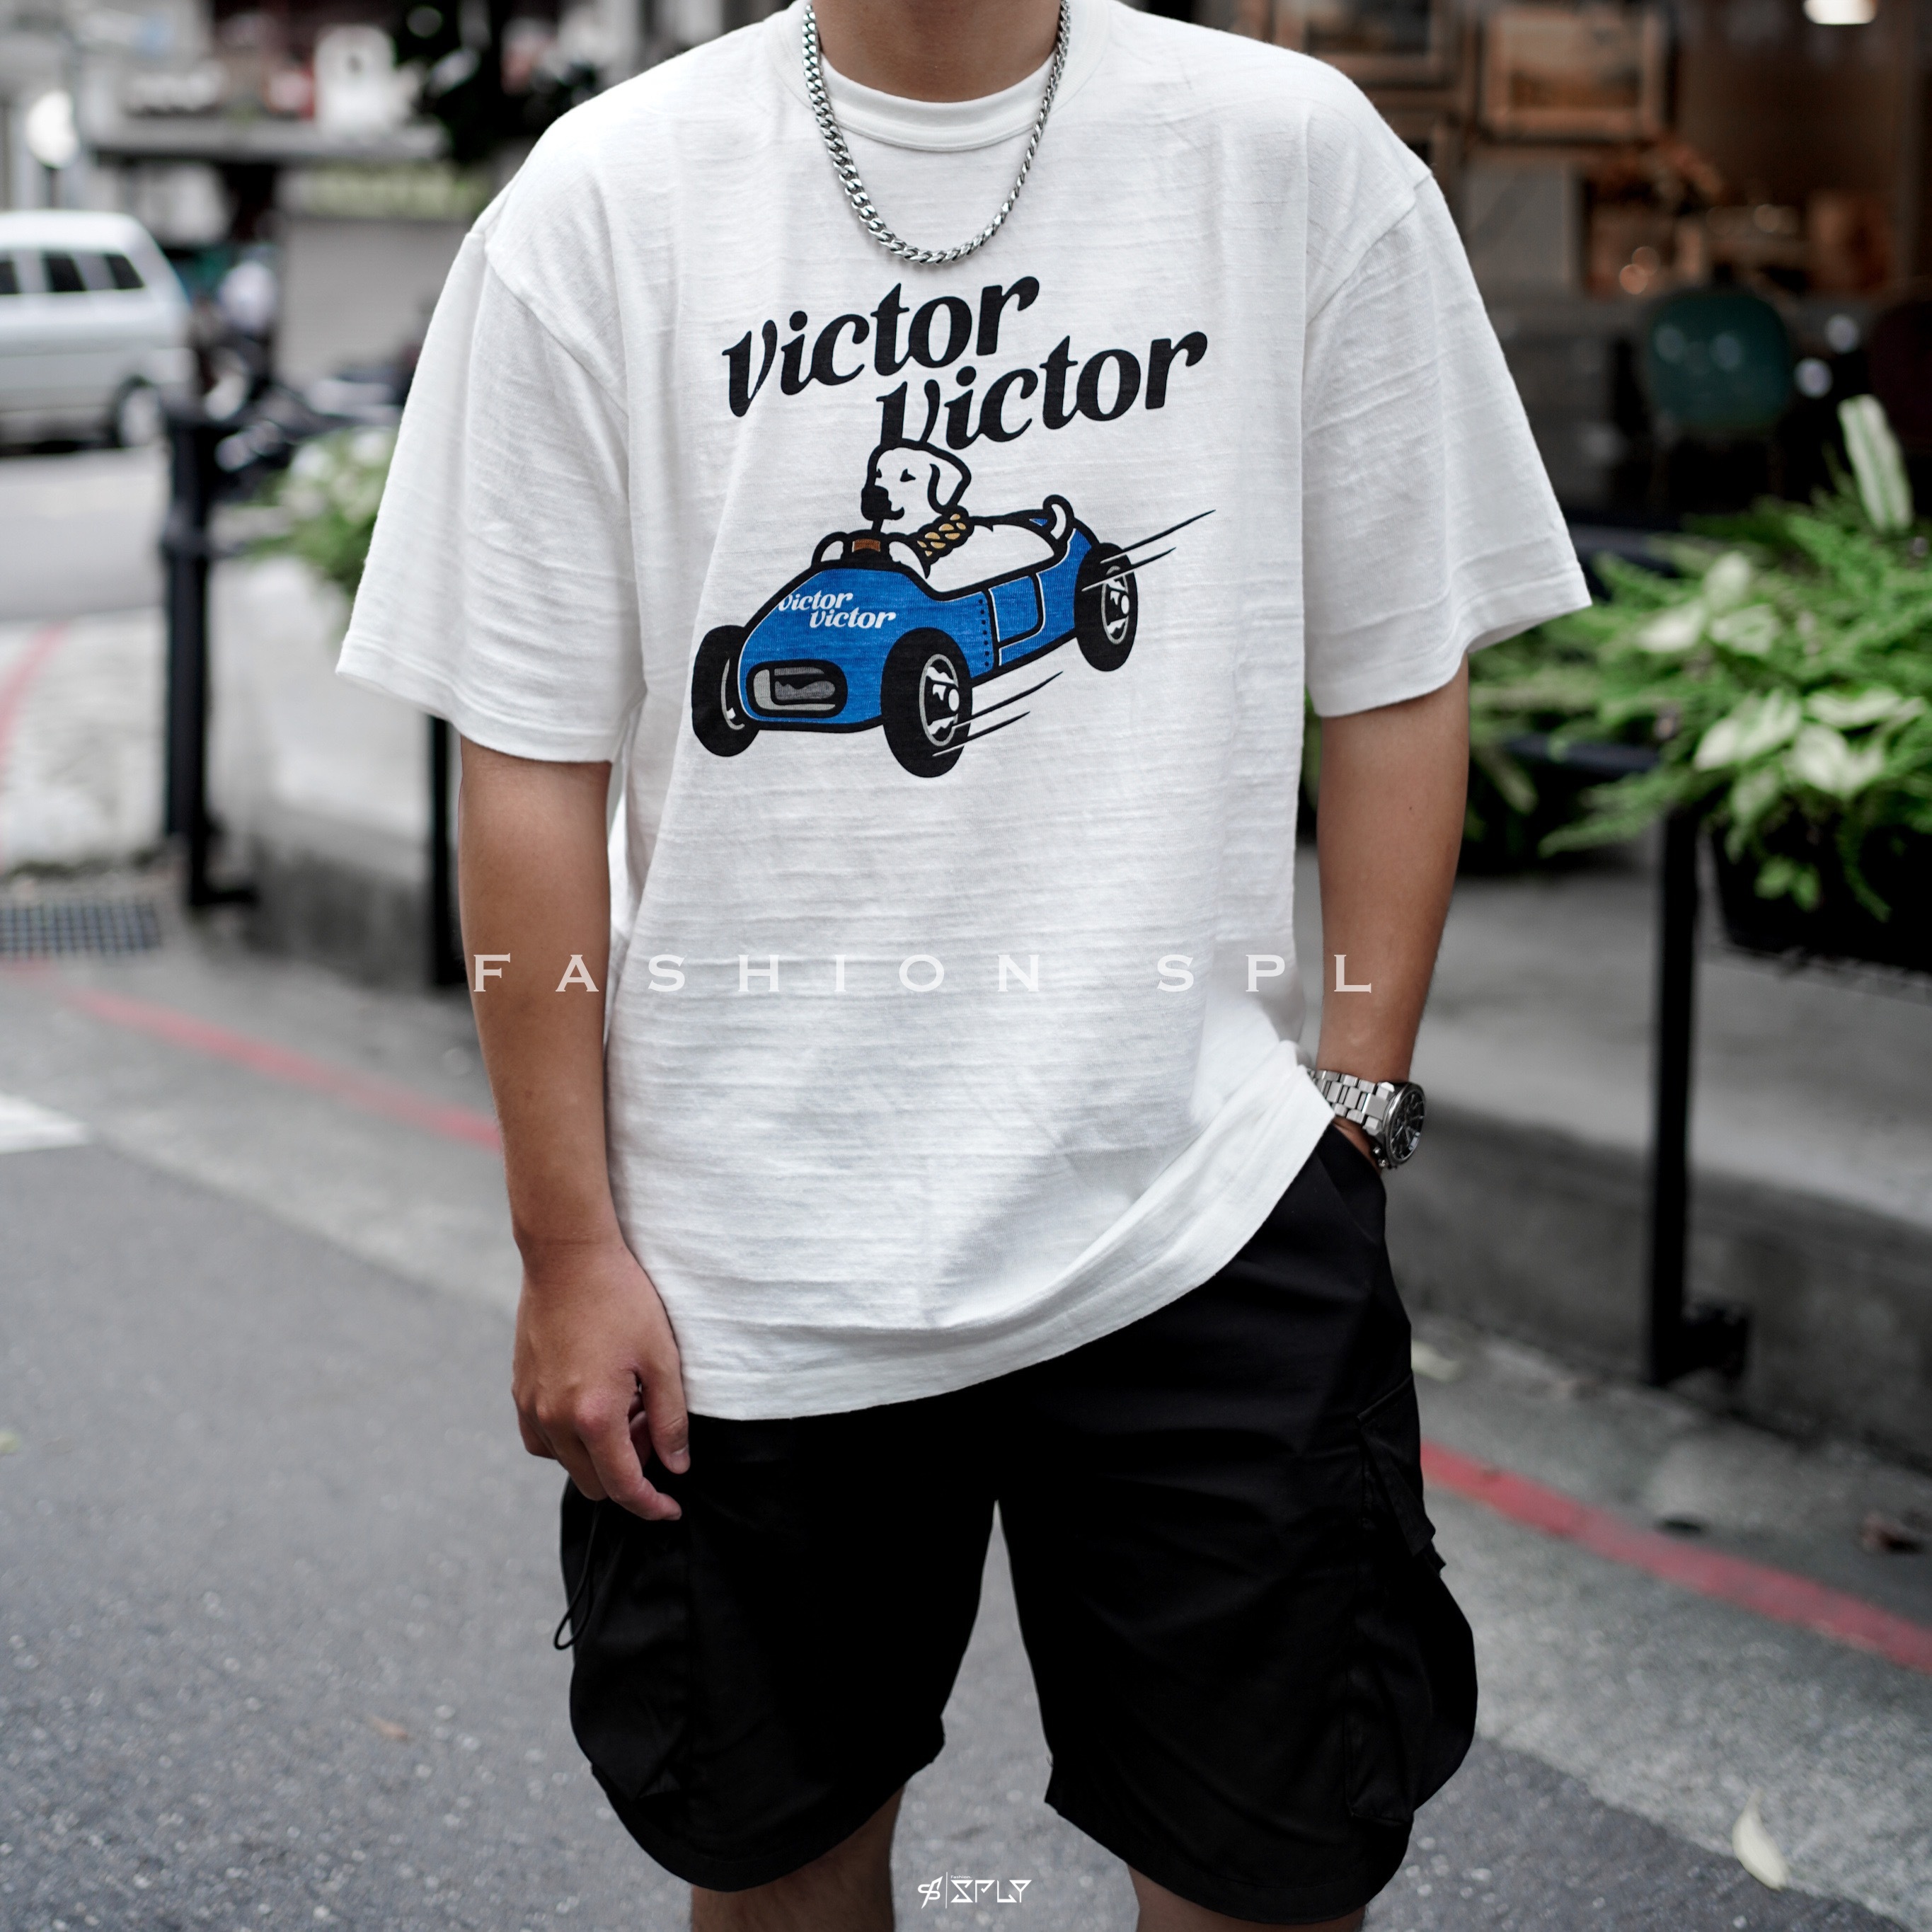 OFF HUMAN MADE VICTOR VICTOR T-SHIRT Sサイズ - トップス